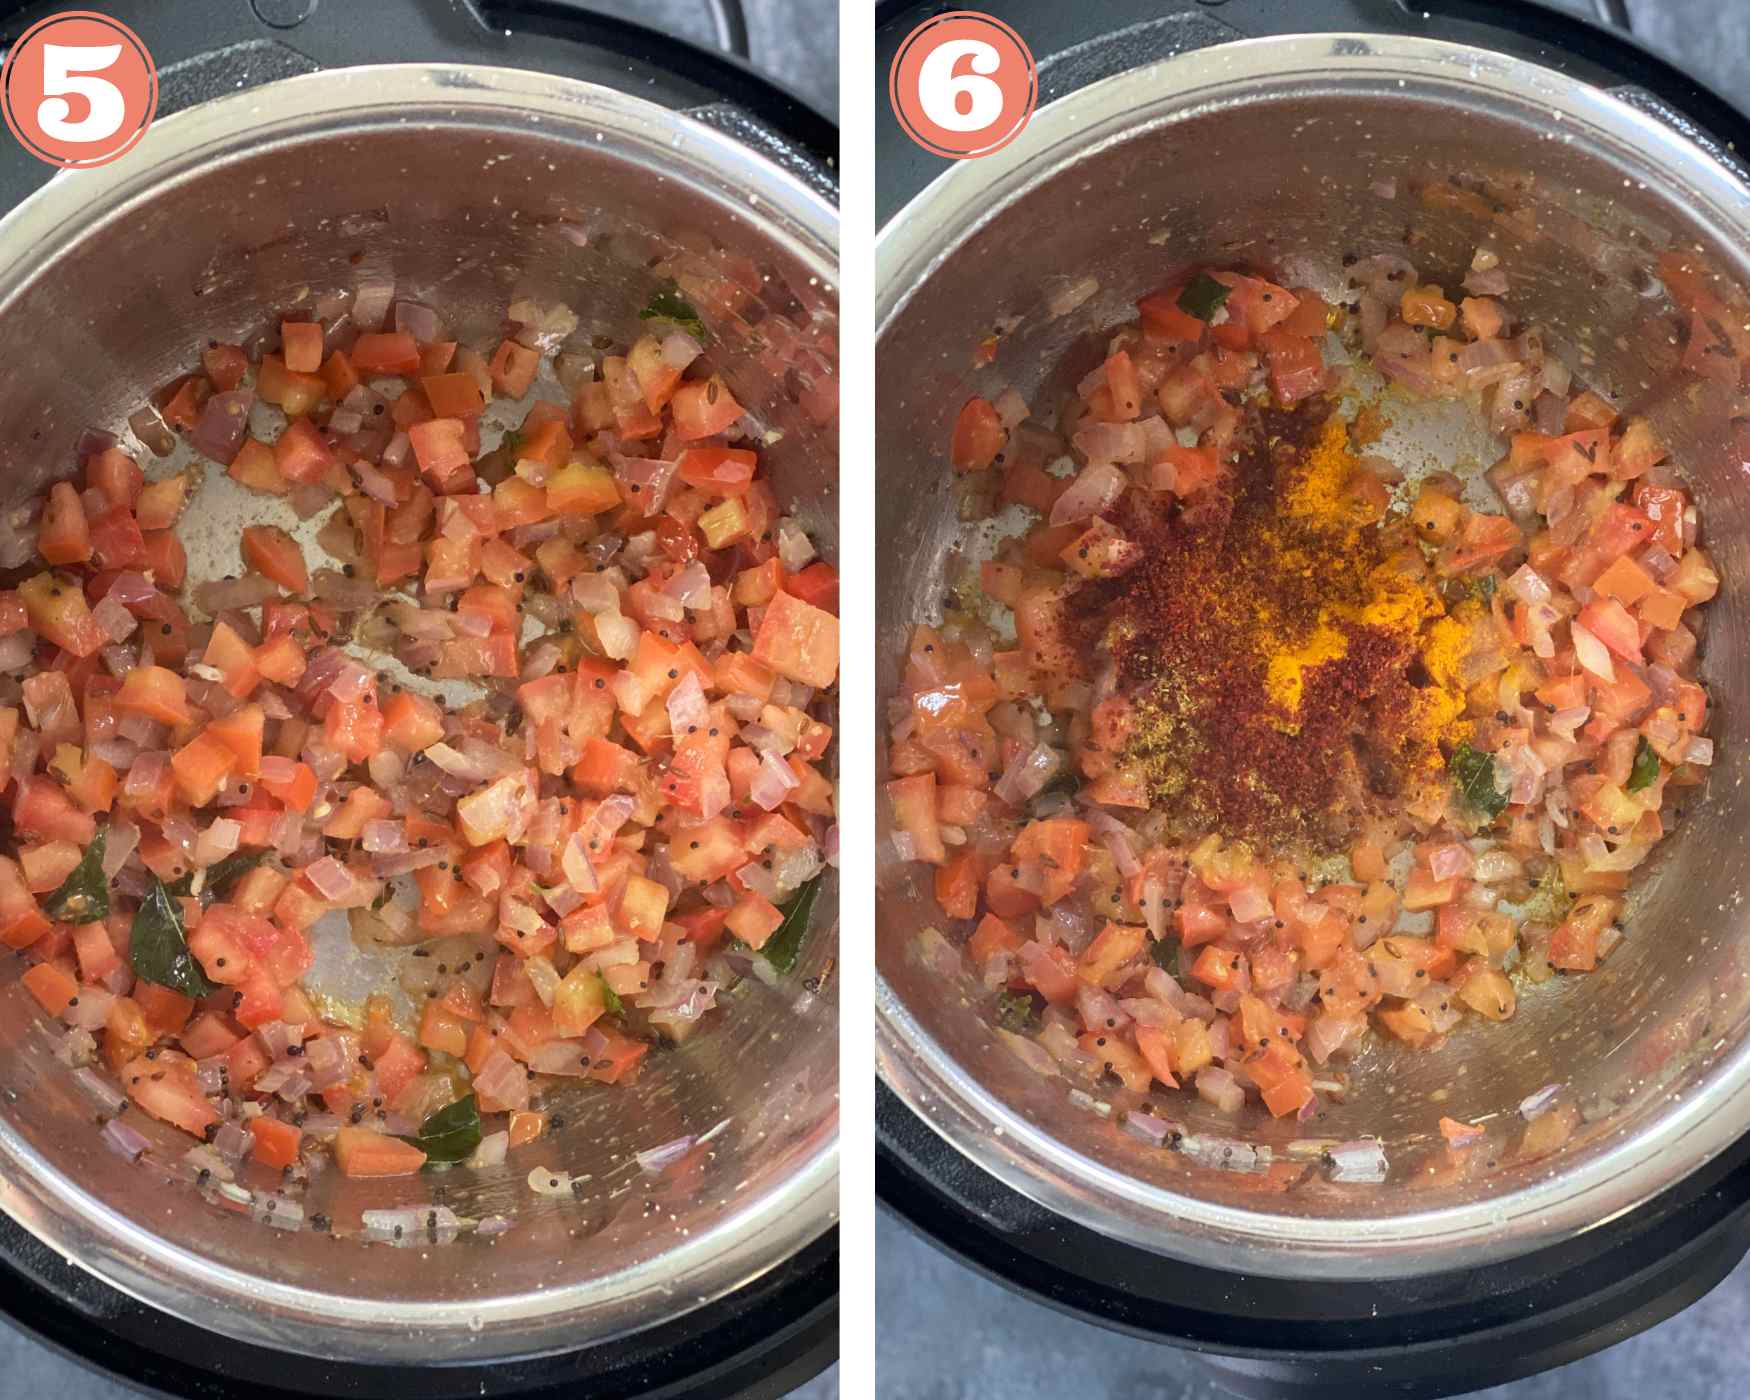 Then cook the tomatoes and add the dry spices to the instant pot.